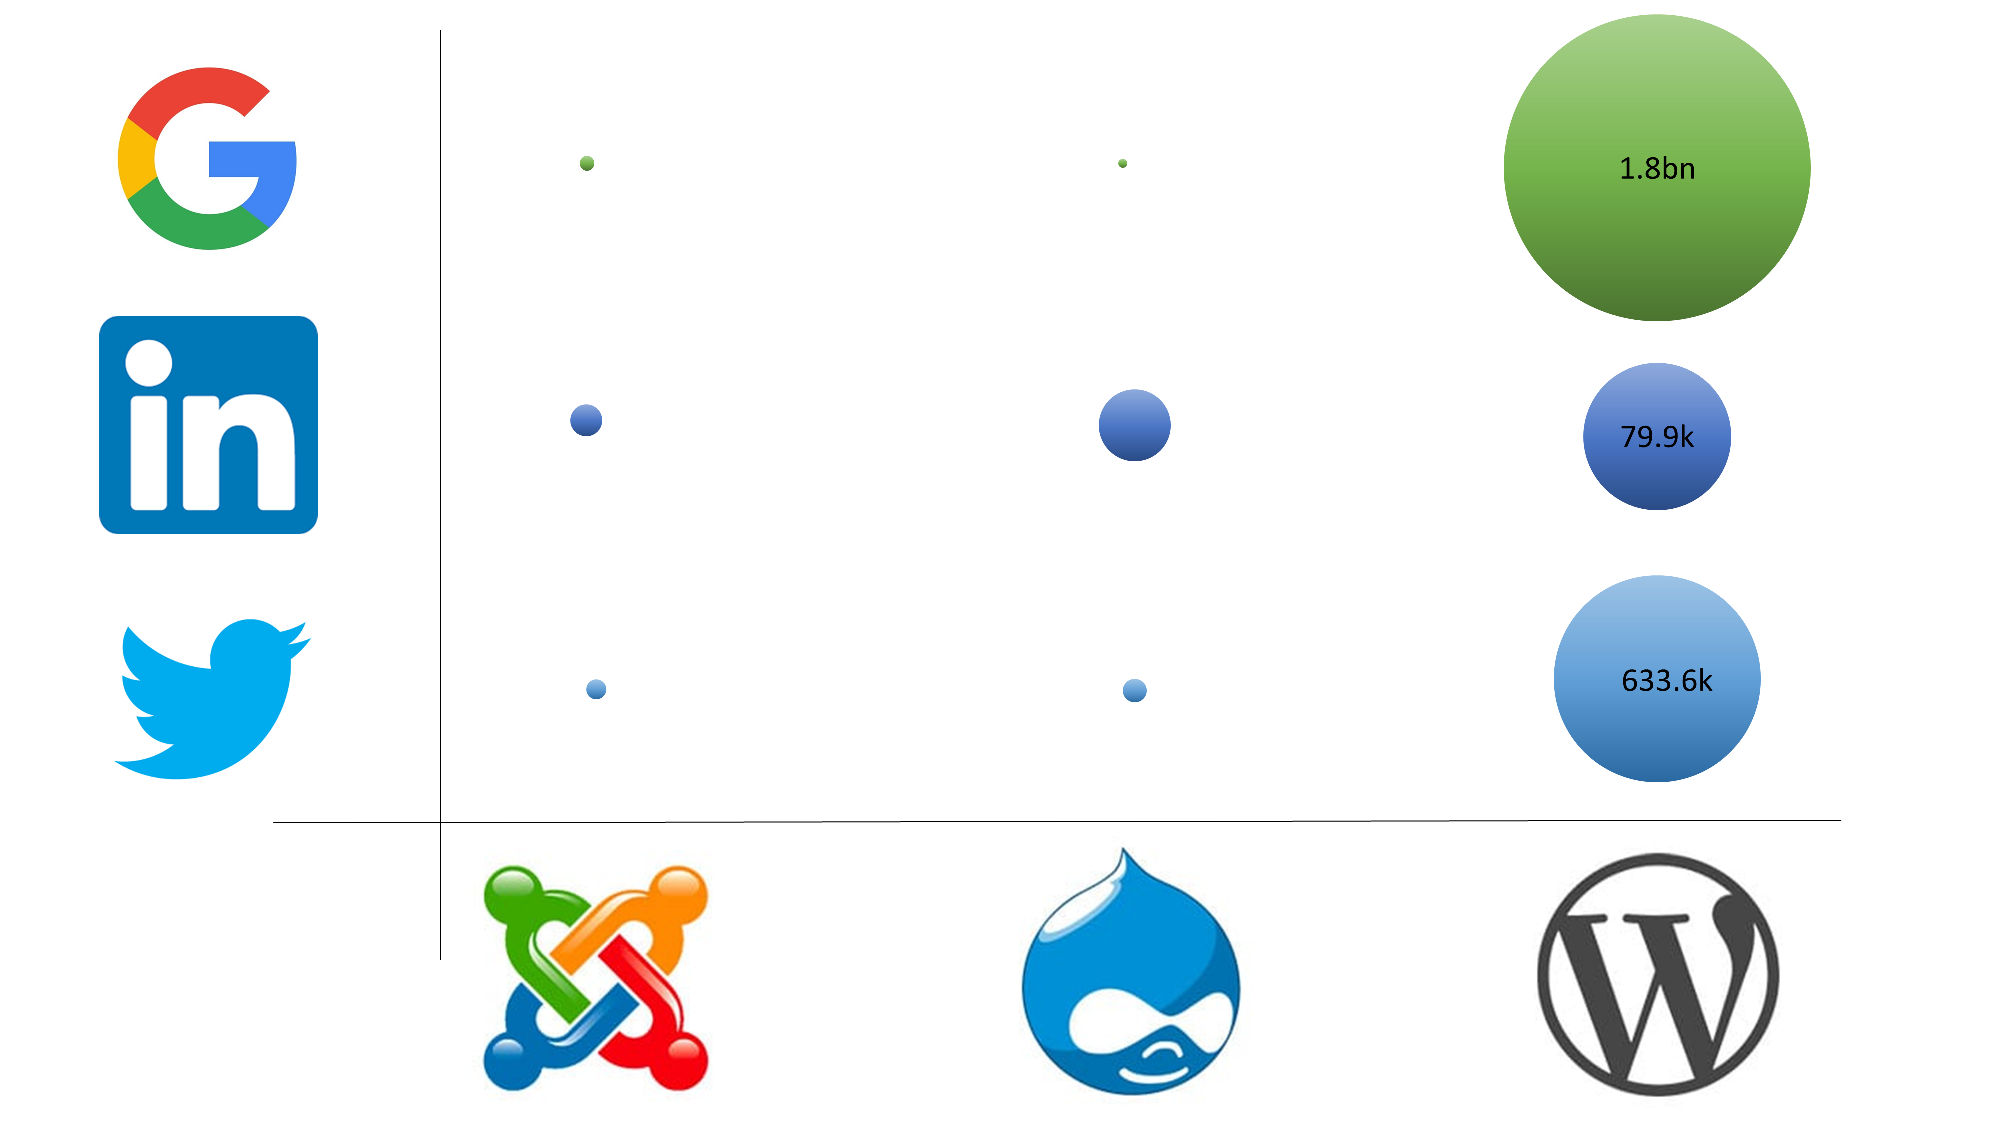 Graph showing relative interest in WordPress, Drupal, and Joomla CMSs on Google, LinkedIn and Twitter